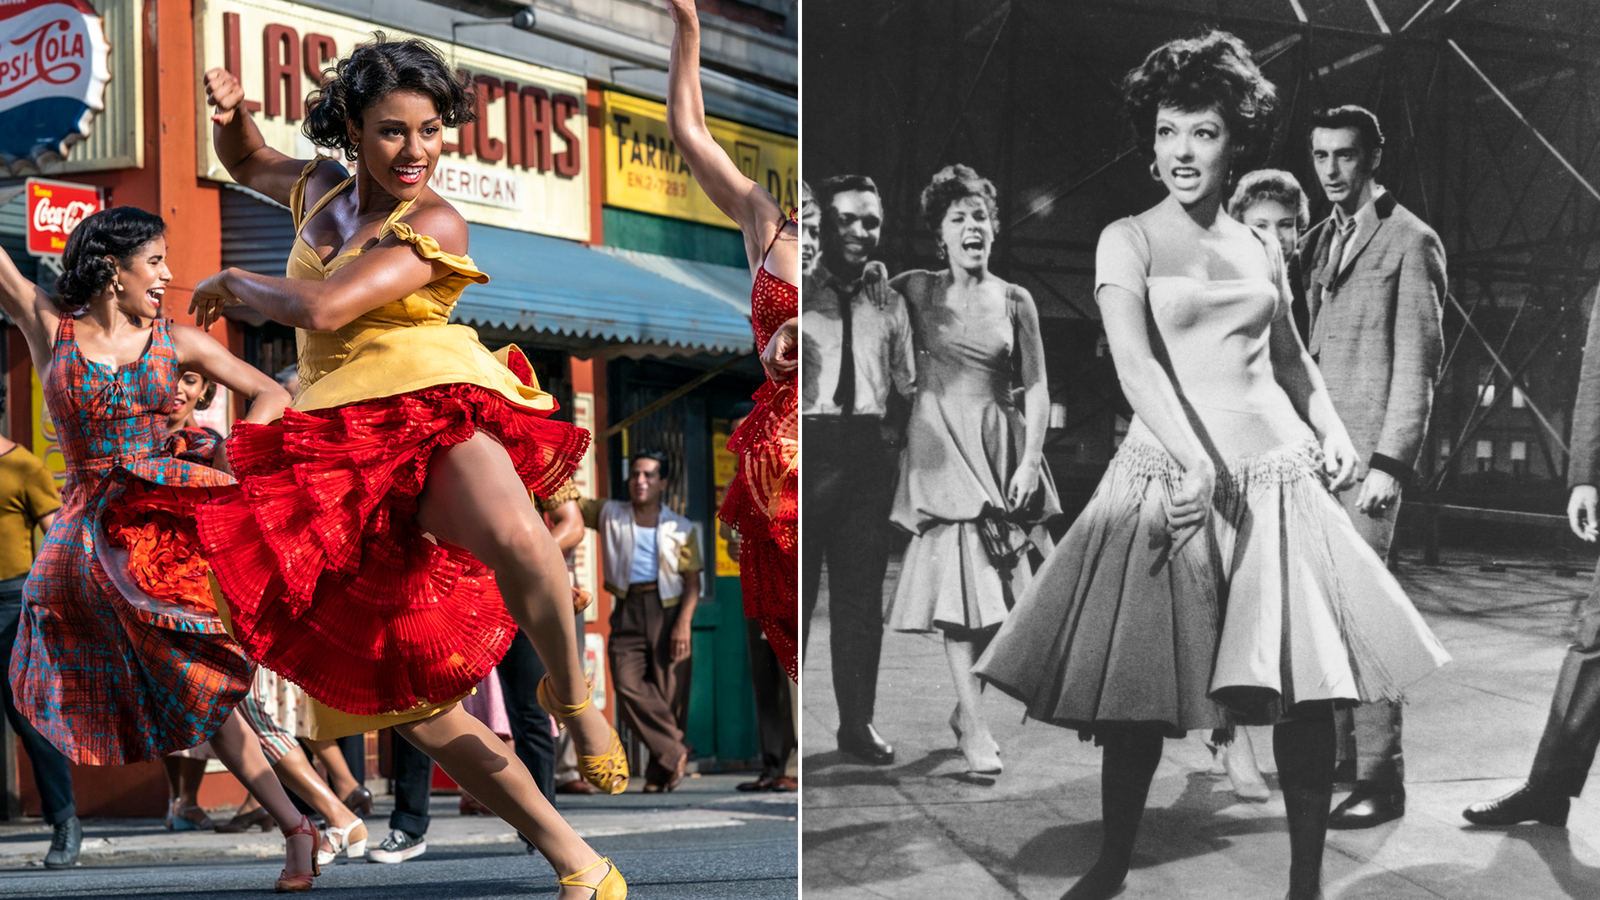 Ariana DeBose in “West Side Story” (2021) and Rita Moreno in “West Side Story” (1962). 